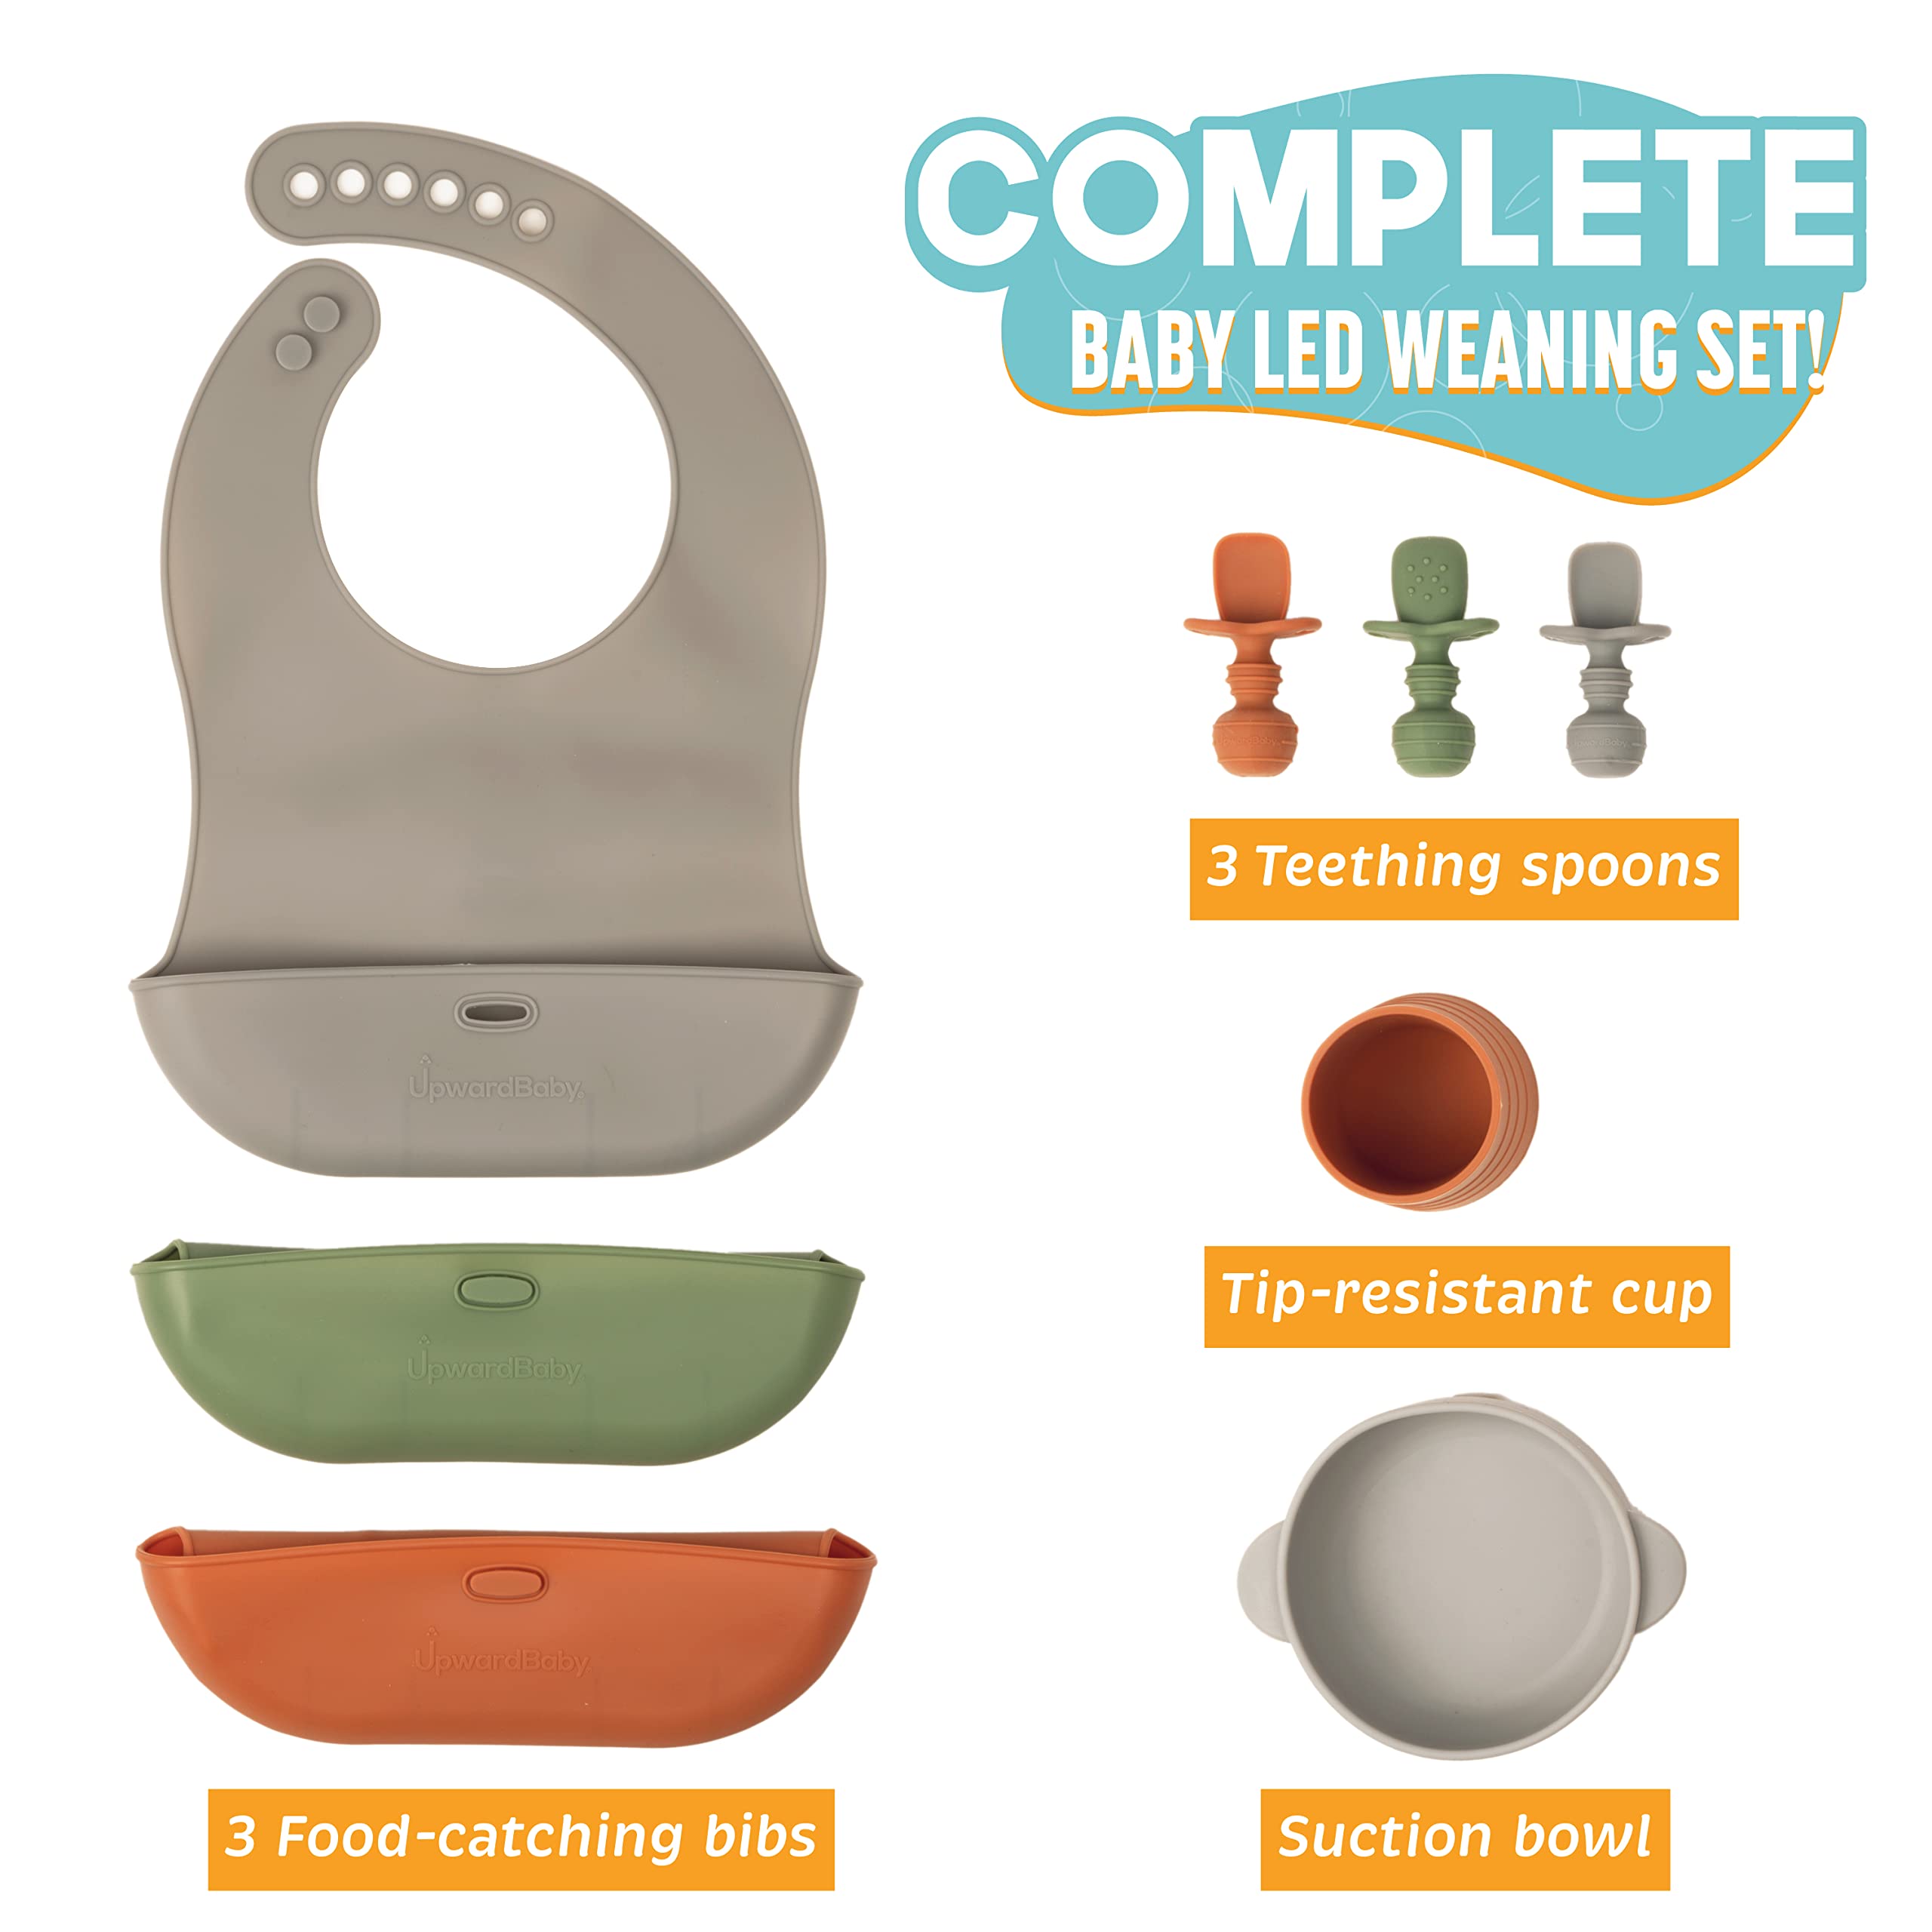 Upward Baby Led Weaning Supplies 6-12 Months Eating Utensils - First Solids Infant Feeding Set - Suction Bowls Baby Plates Dishes Toddler Spoons and Cup with Silicone Bibs - Self Eating Essentials